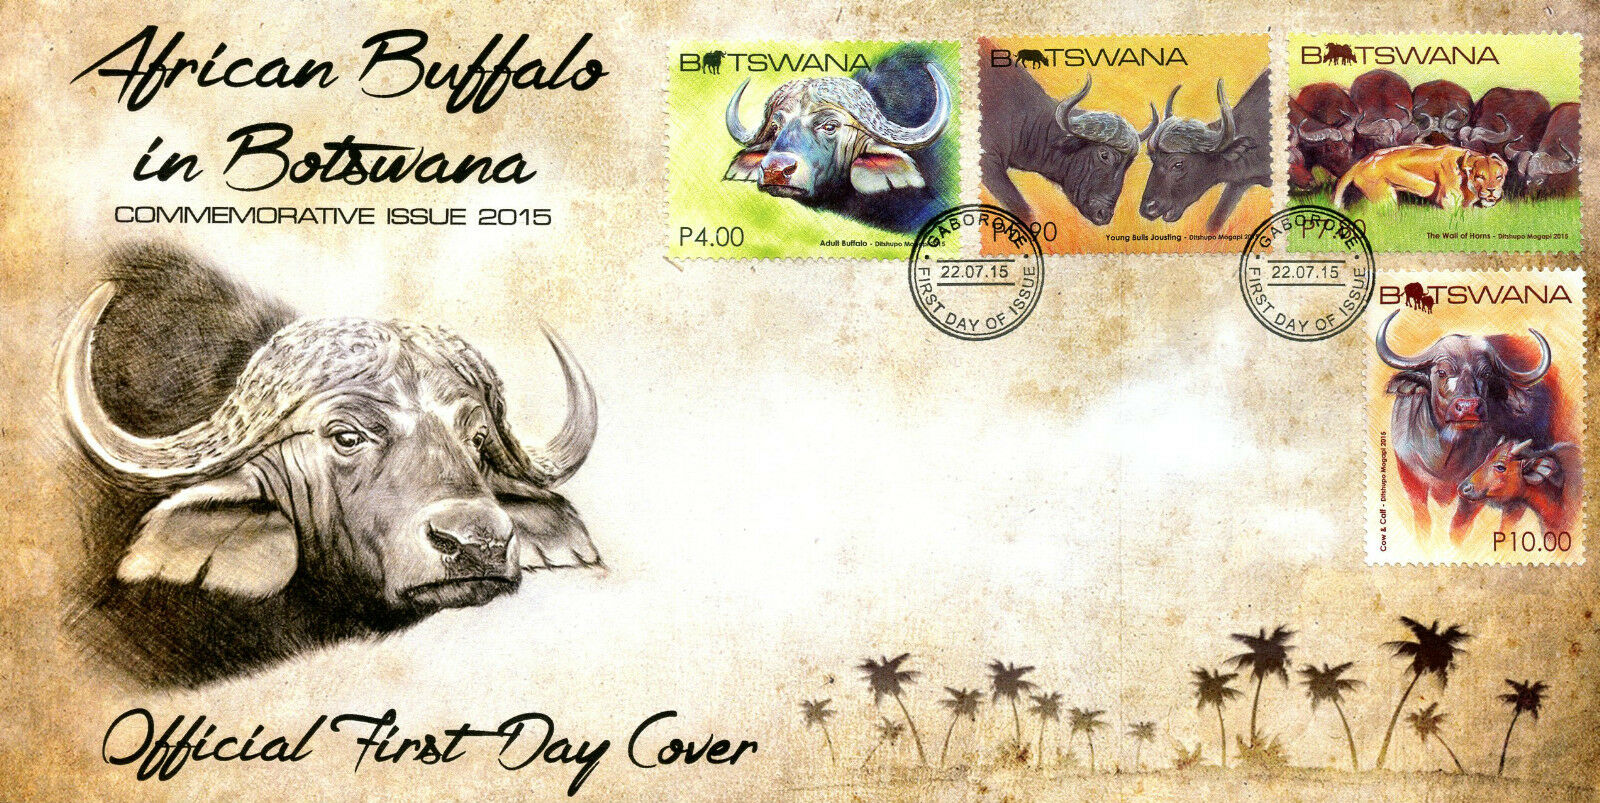 Botswana 2015 FDC African Buffalo 4v Cover Buffalos Lions Wild Animals Stamps